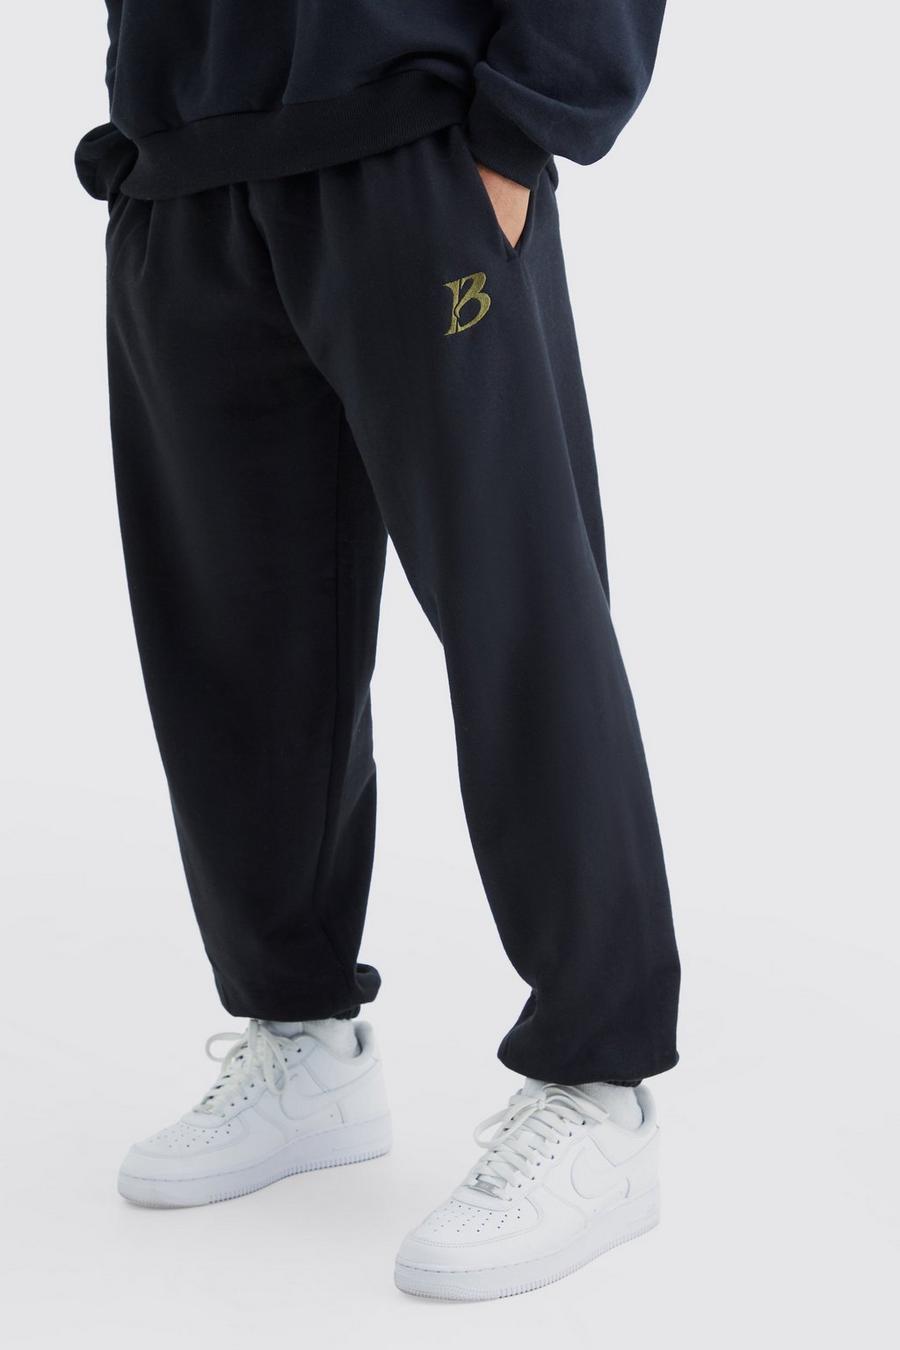 Black B Man Embroidered Oversized Joggers